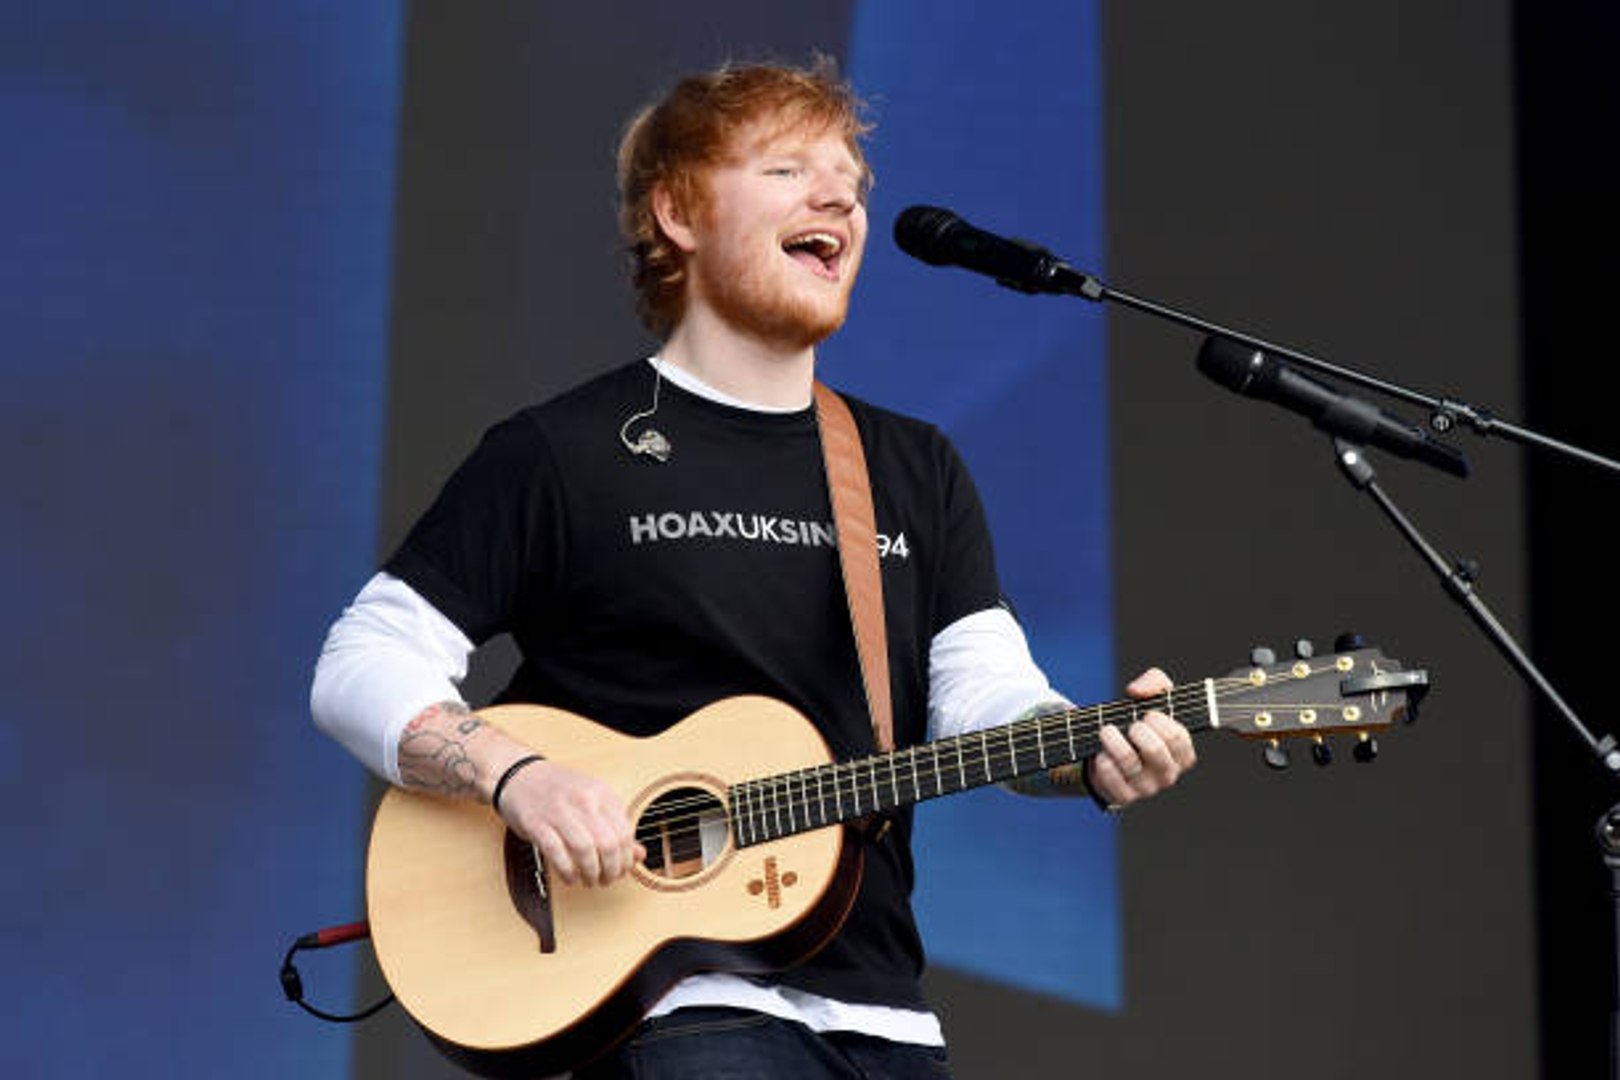 Ed Sheeran's New Album Won't Be out Until Late 2020